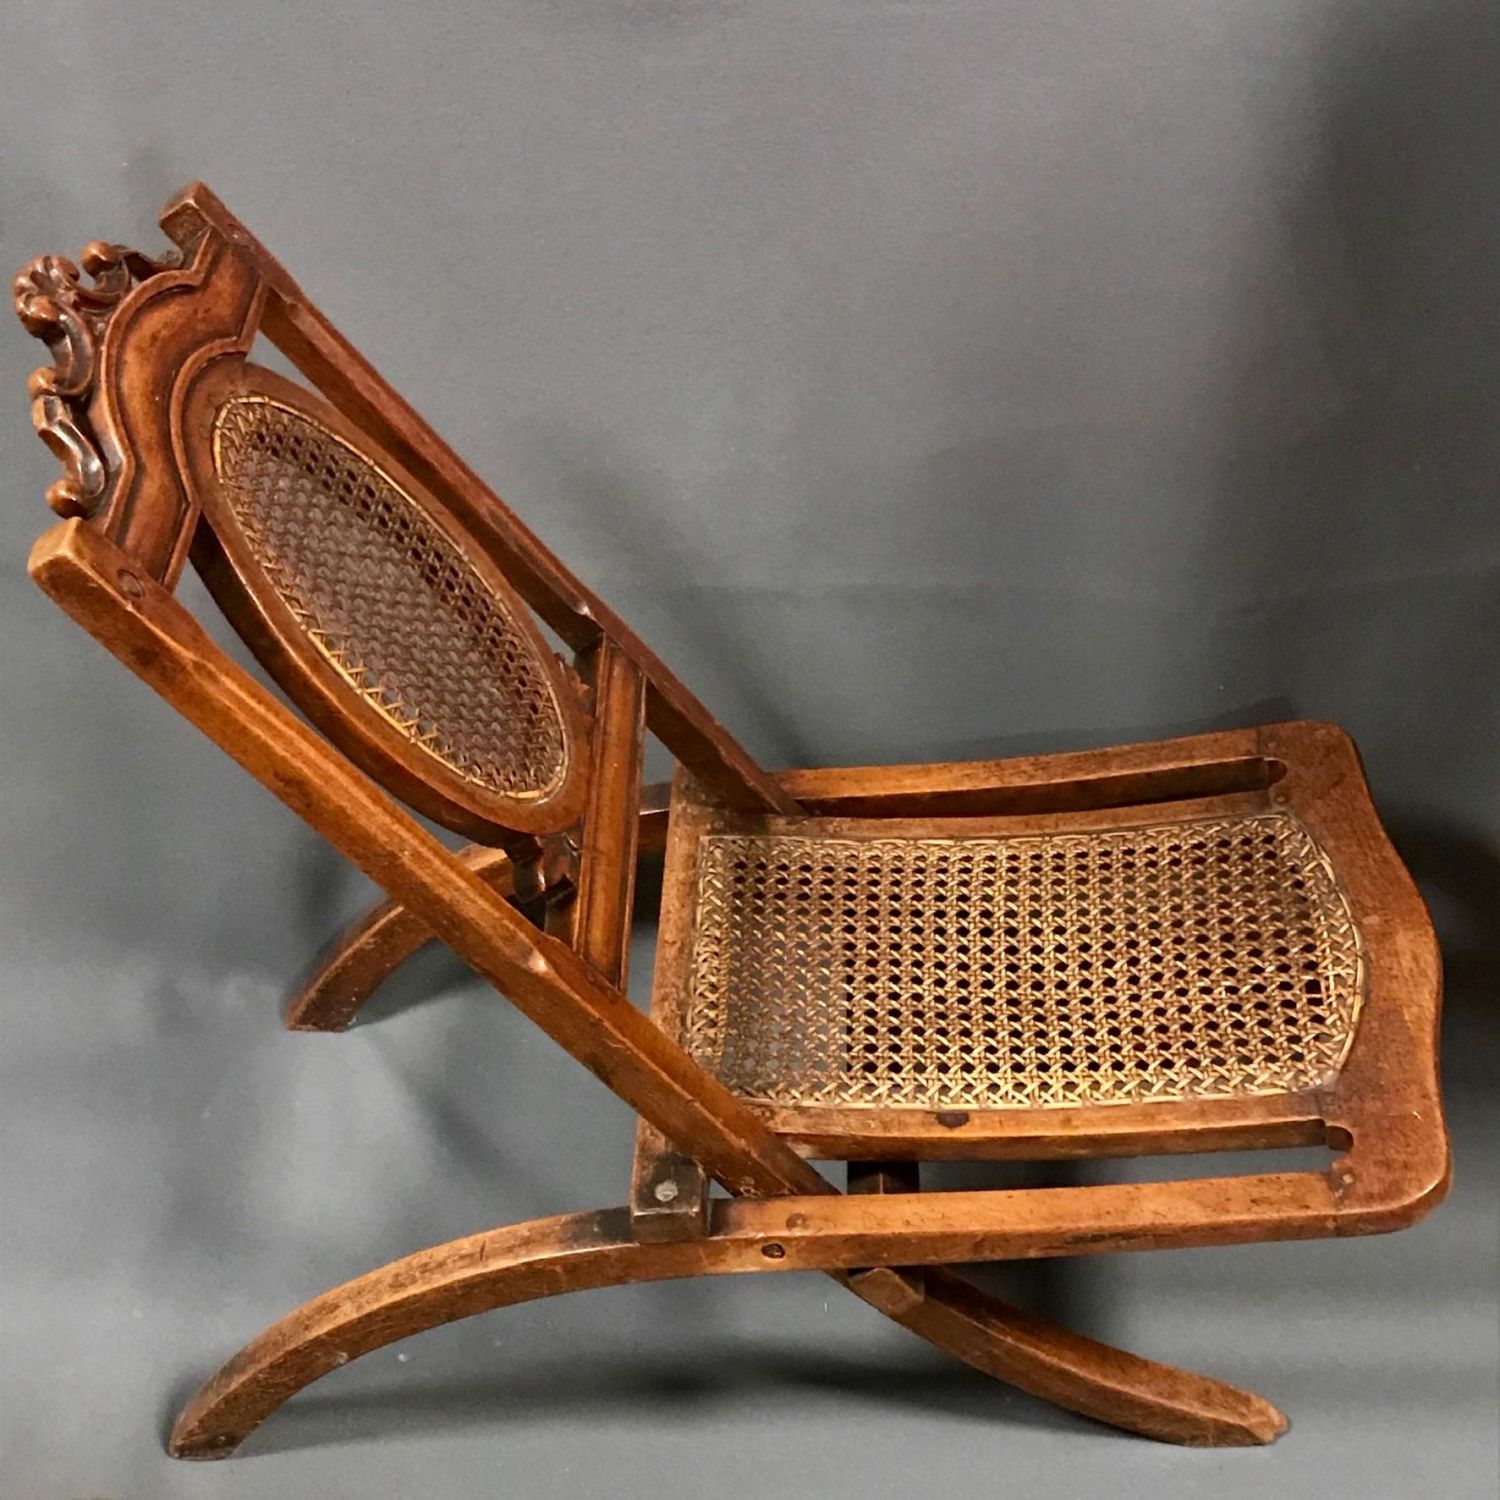 Antique Cane Seated Folding Chair Antique Chairs